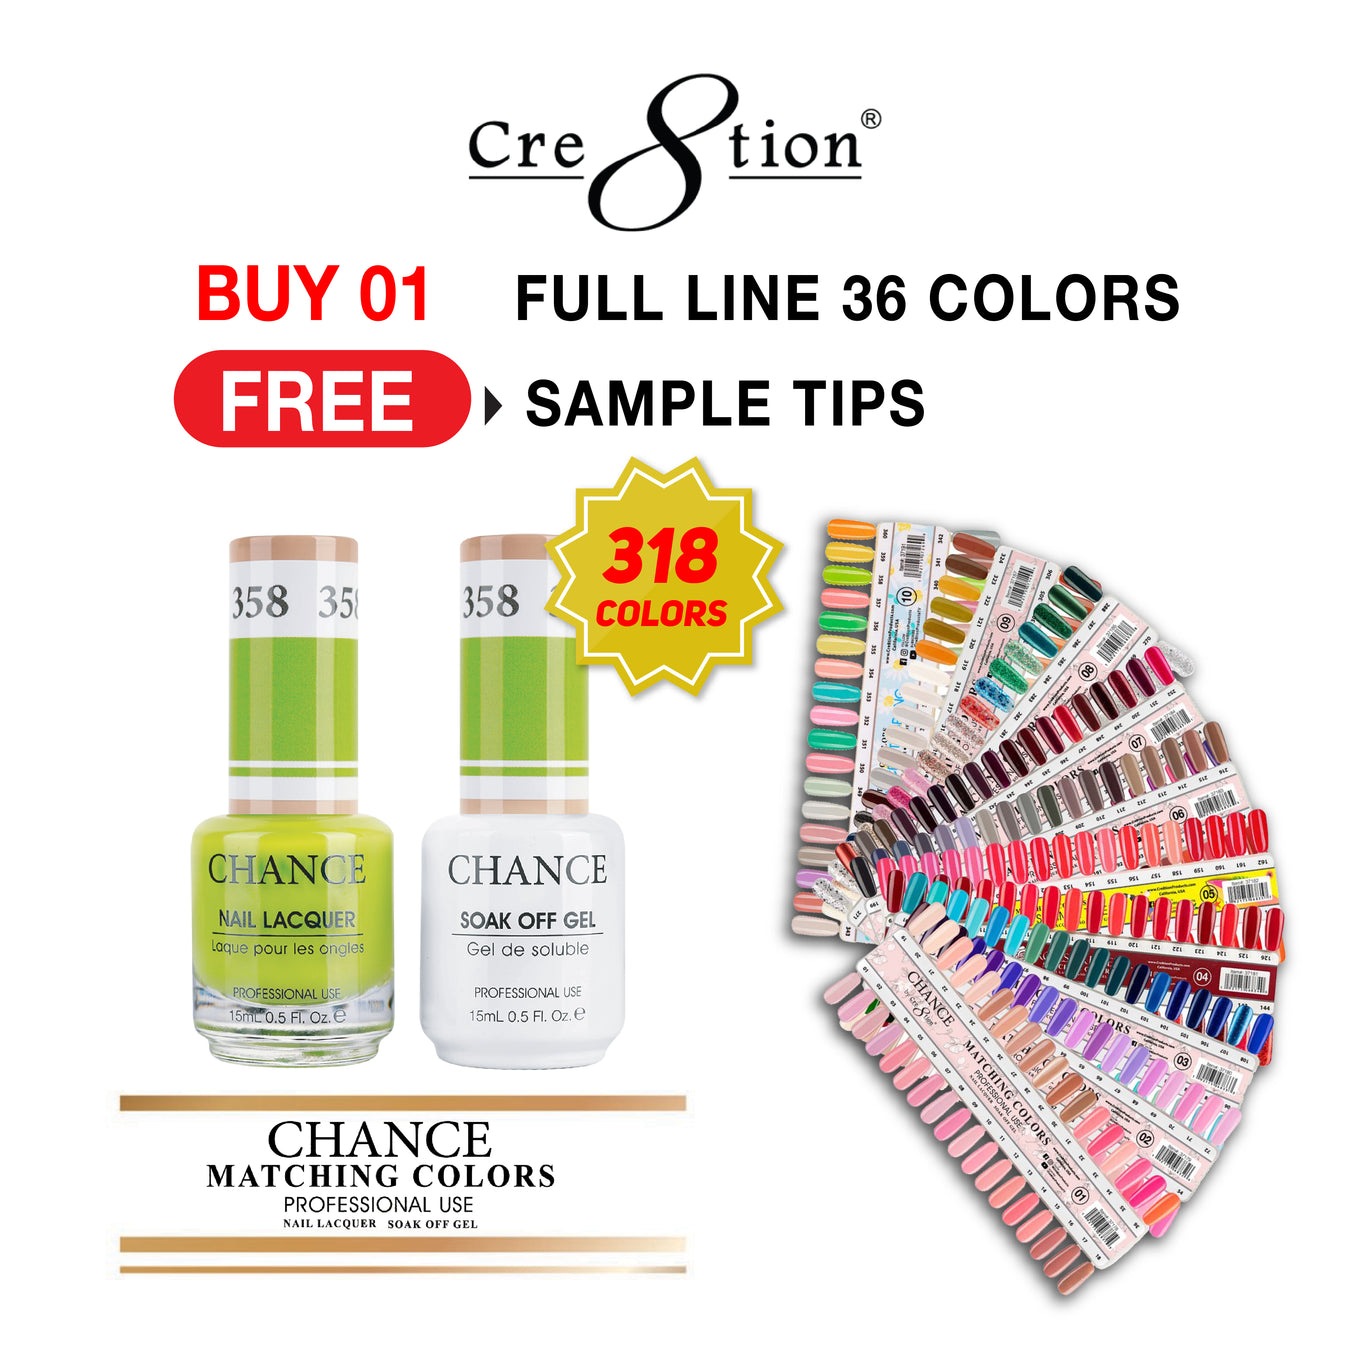 CRE8TION GEL